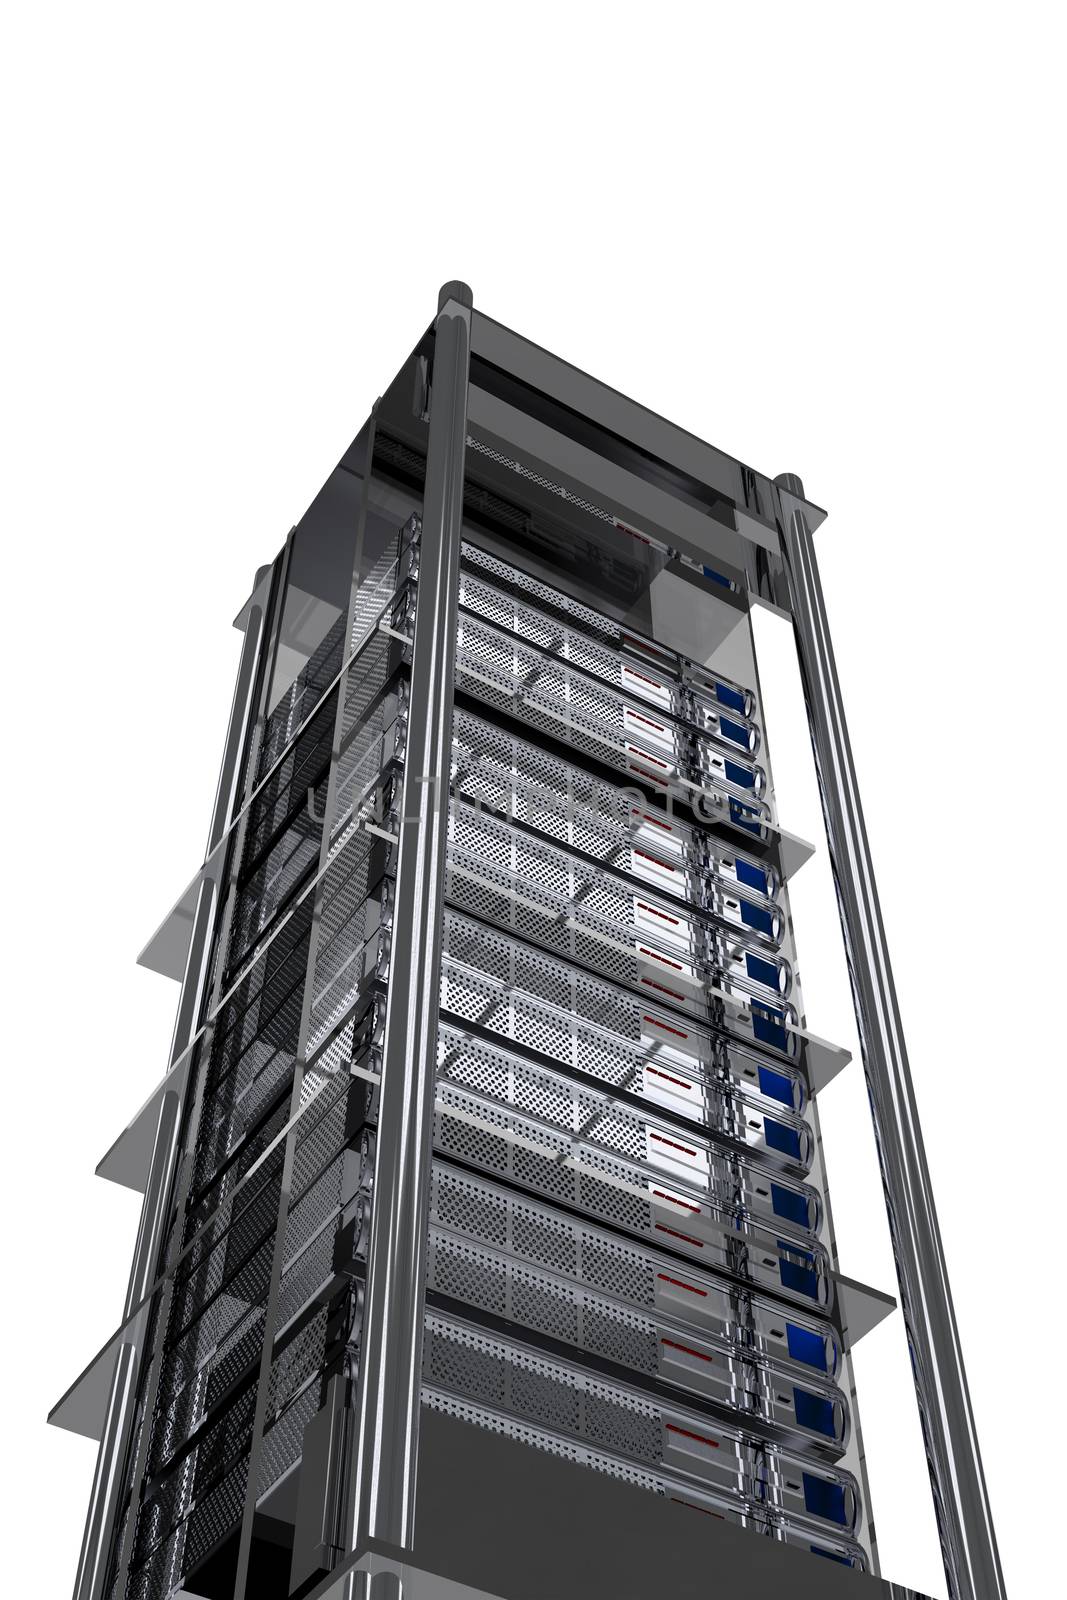 Servers Tower by welcomia